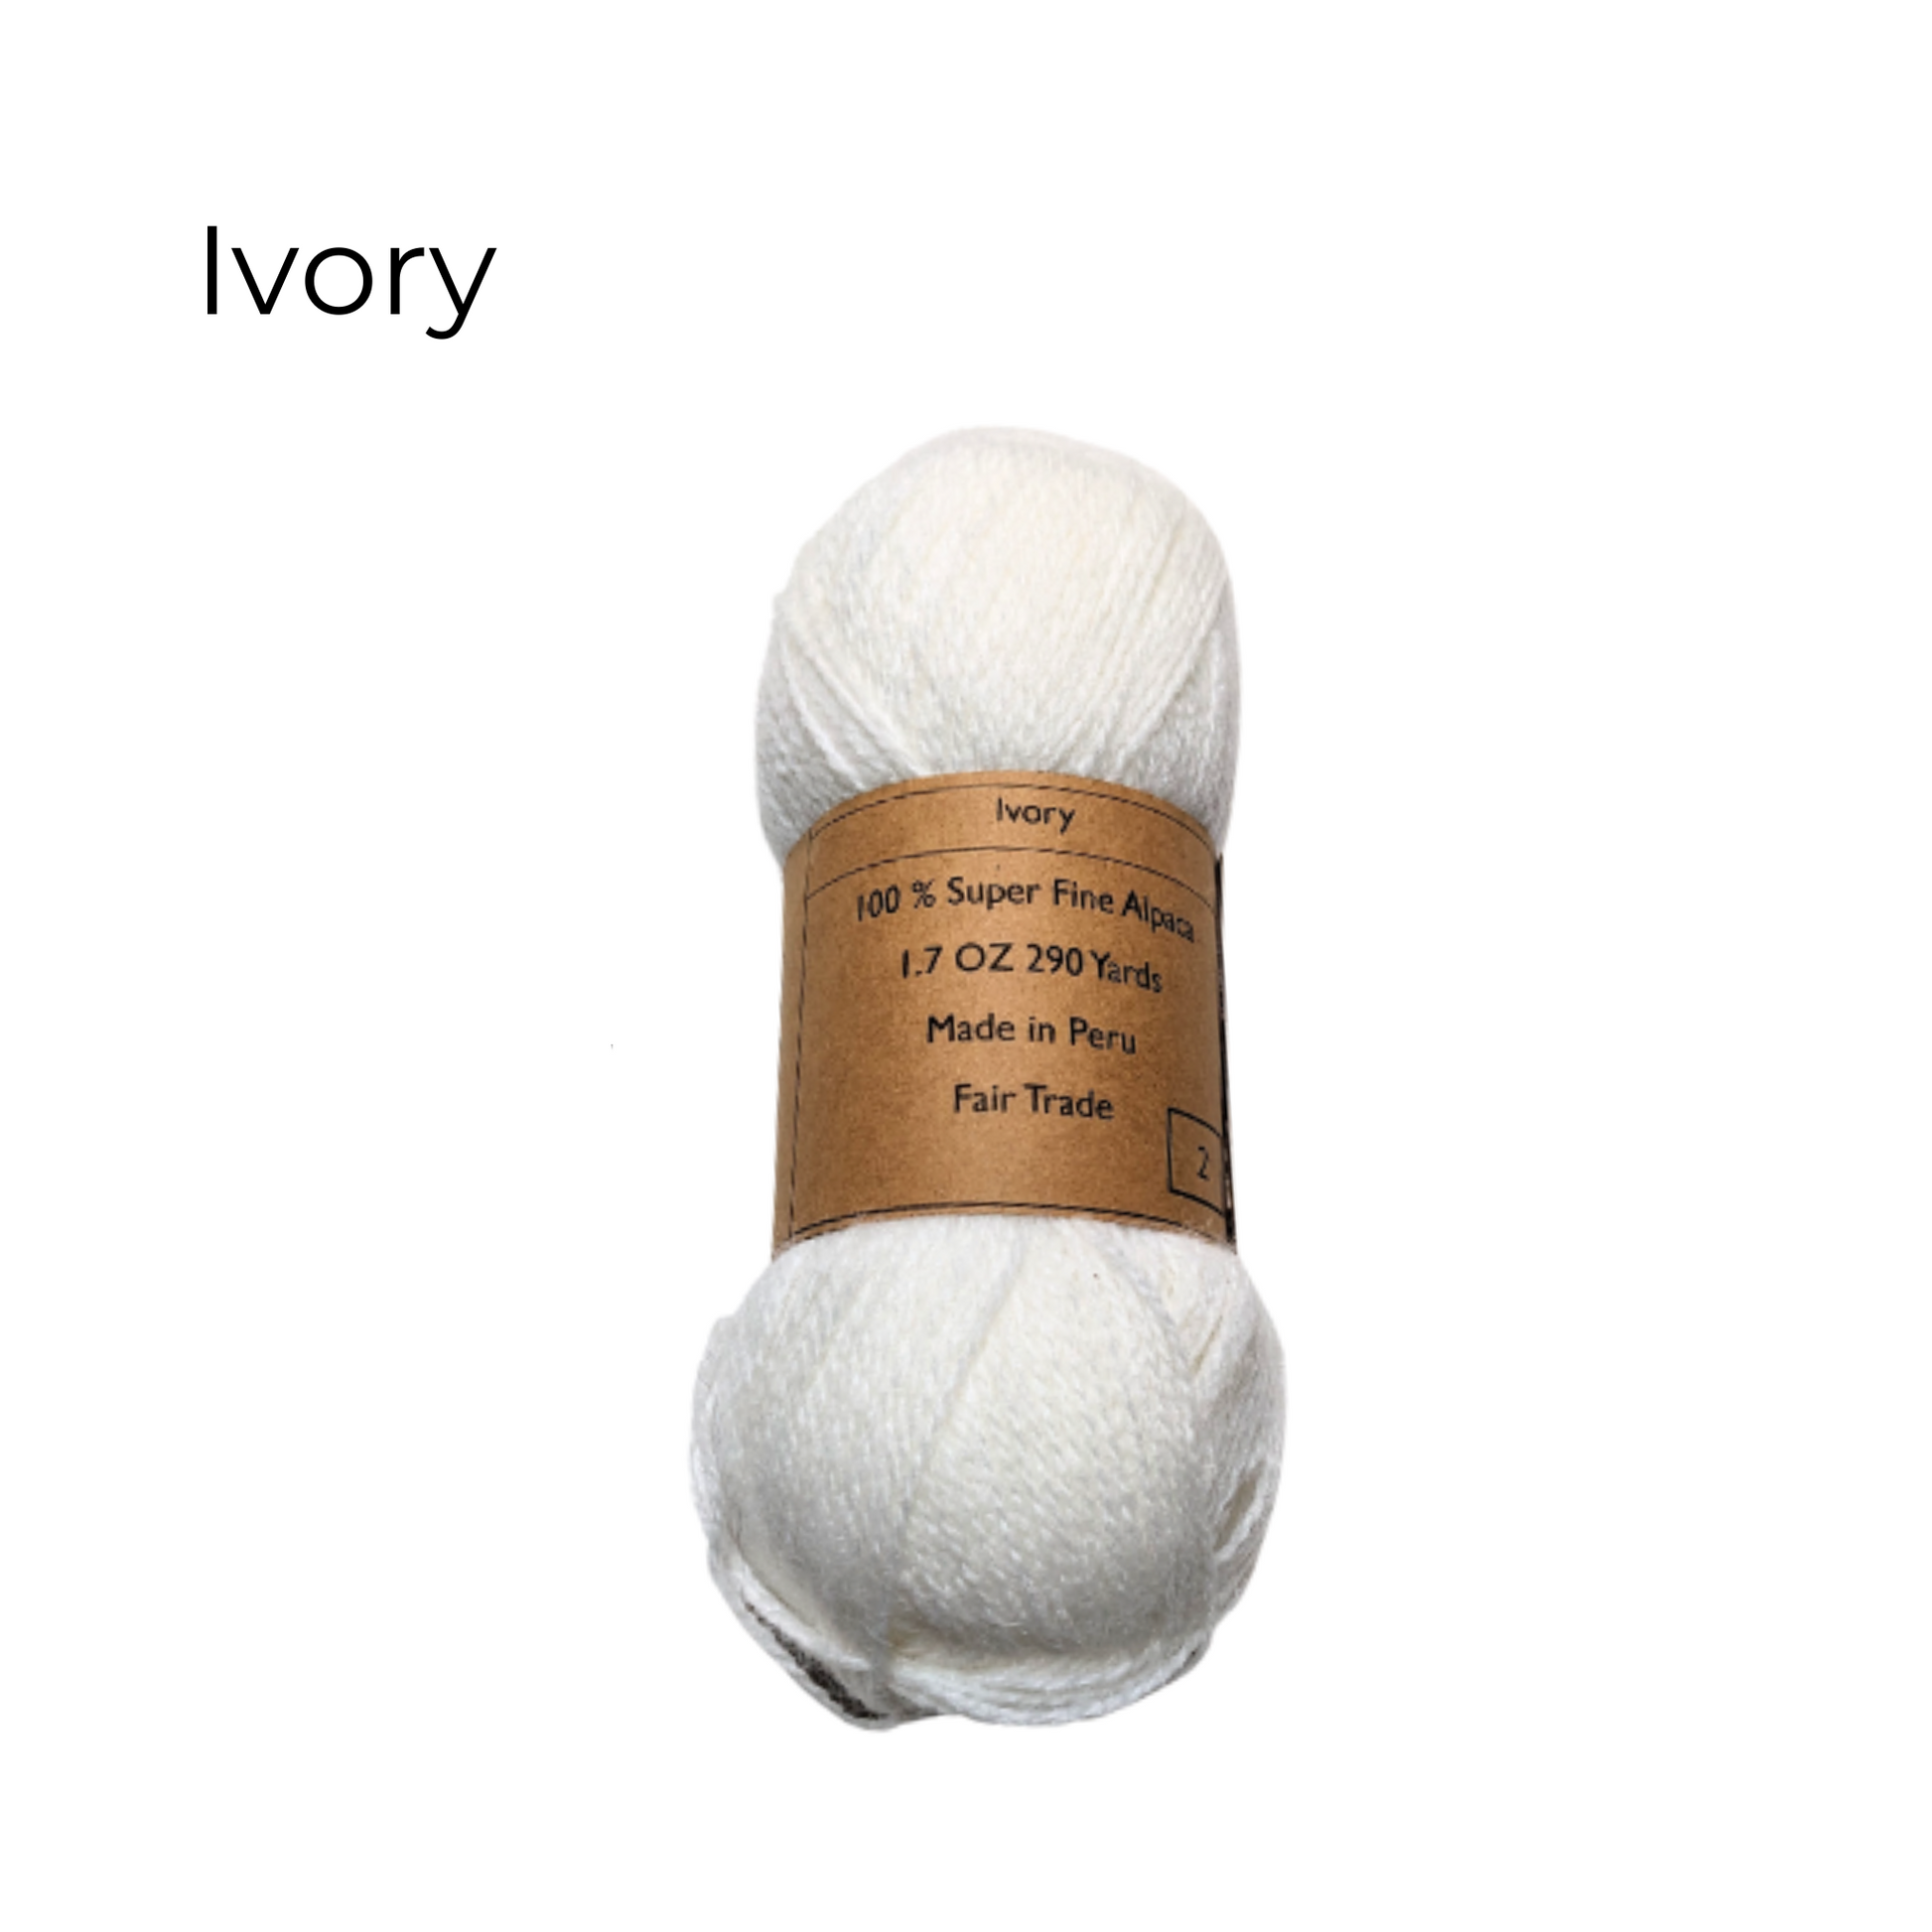 100% Baby Alpaca Yarn (Weight #1) LACE - SET OF 3 Skeins 150 GRAMS TOTAL-  Luxuriously and CARING SOFT - Llacta